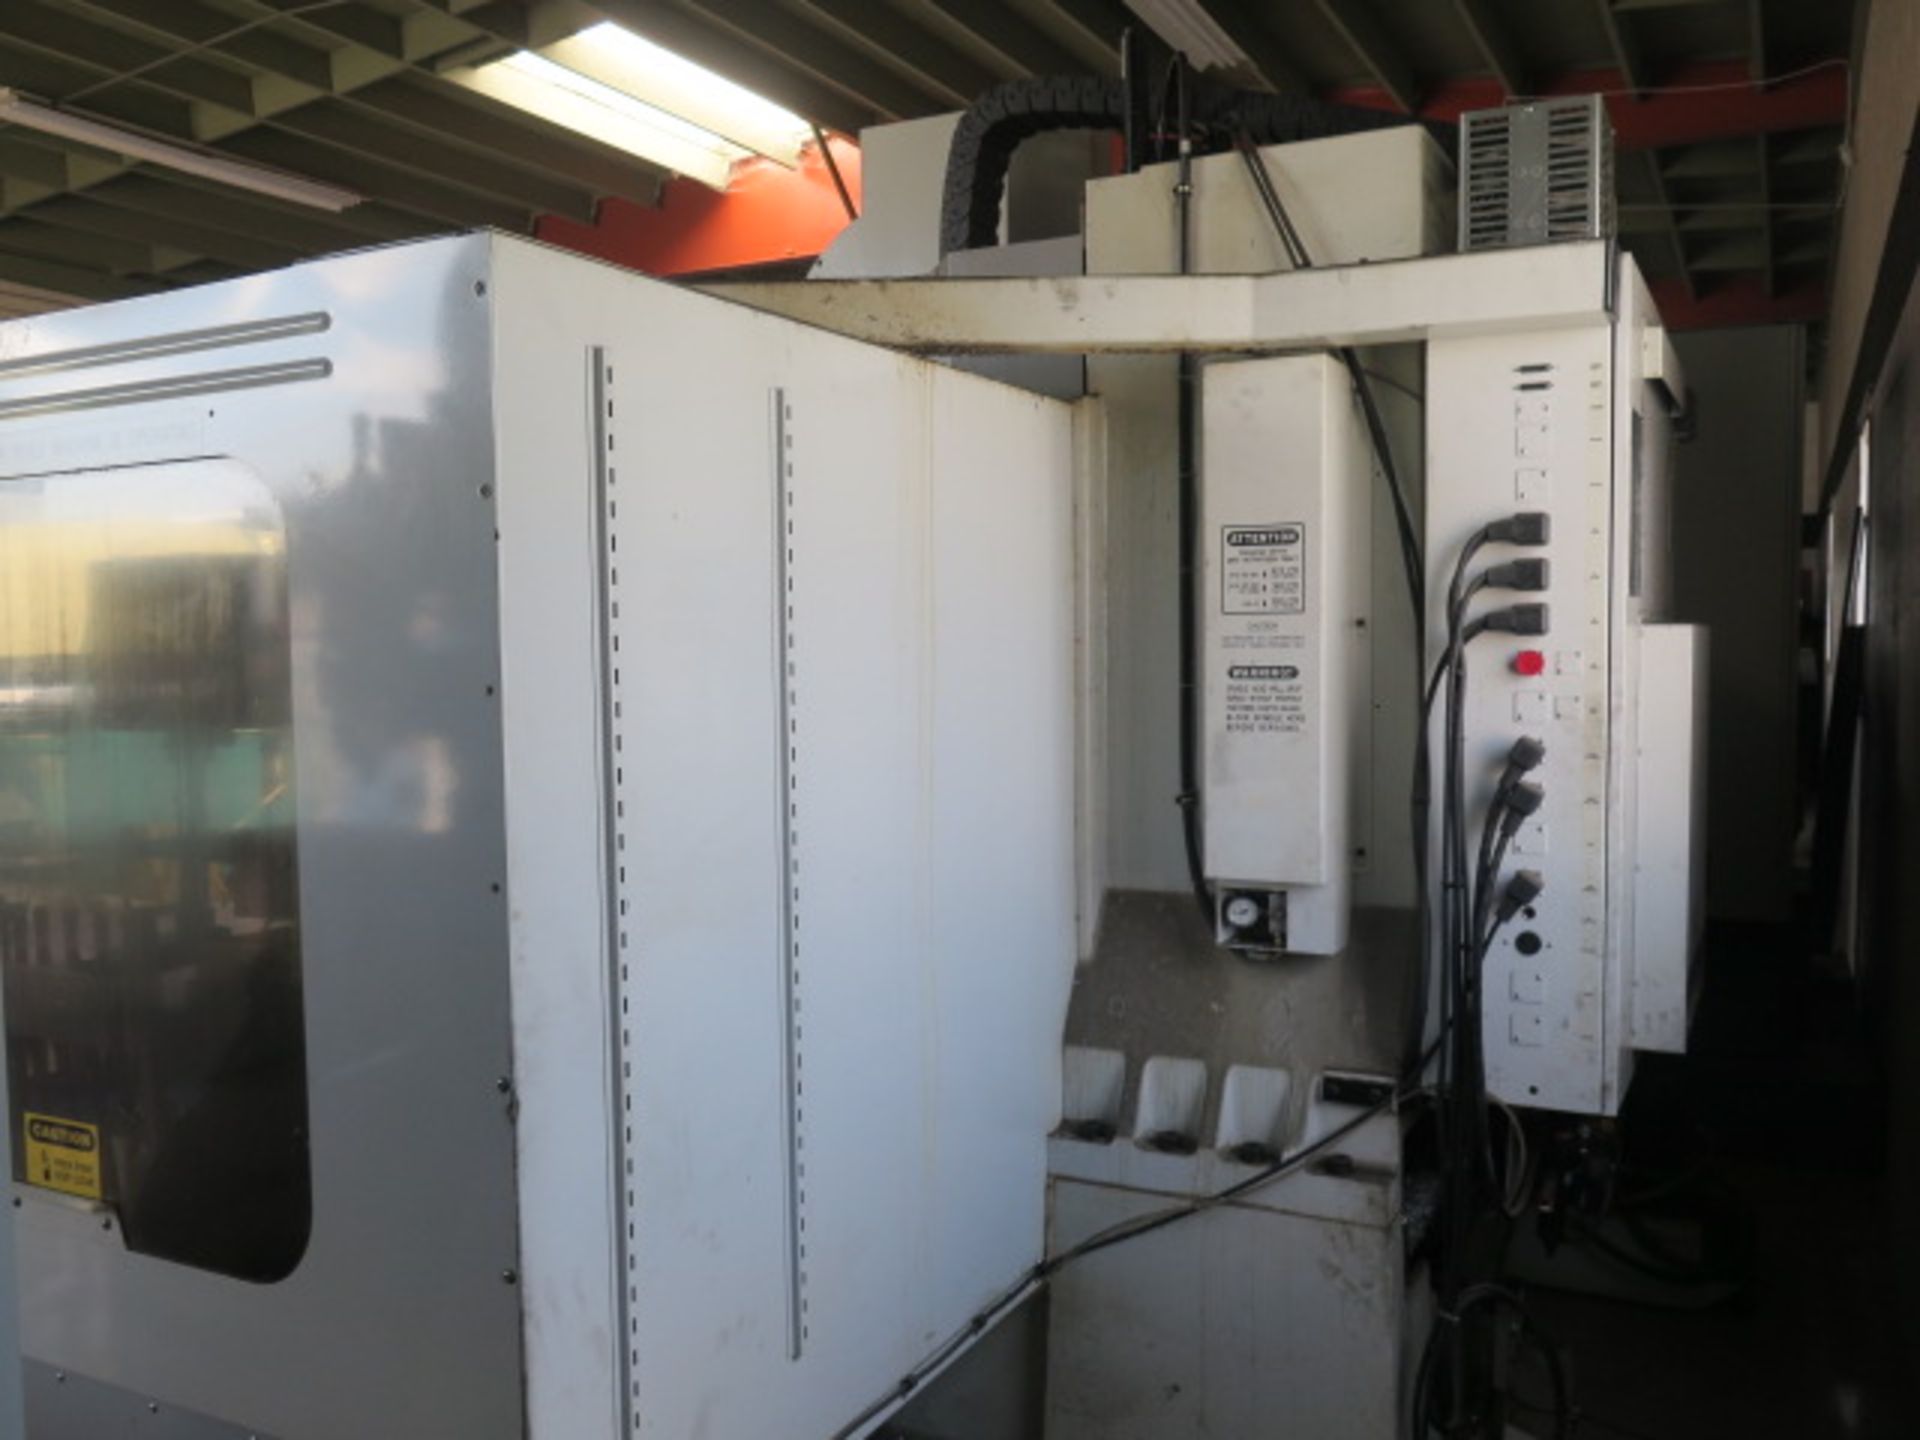 2000 Haas VF-5 4-Axis CNC Vertical Machining Center s/n 21677 w/ Haas Controls, SOLD AS IS - Image 16 of 20